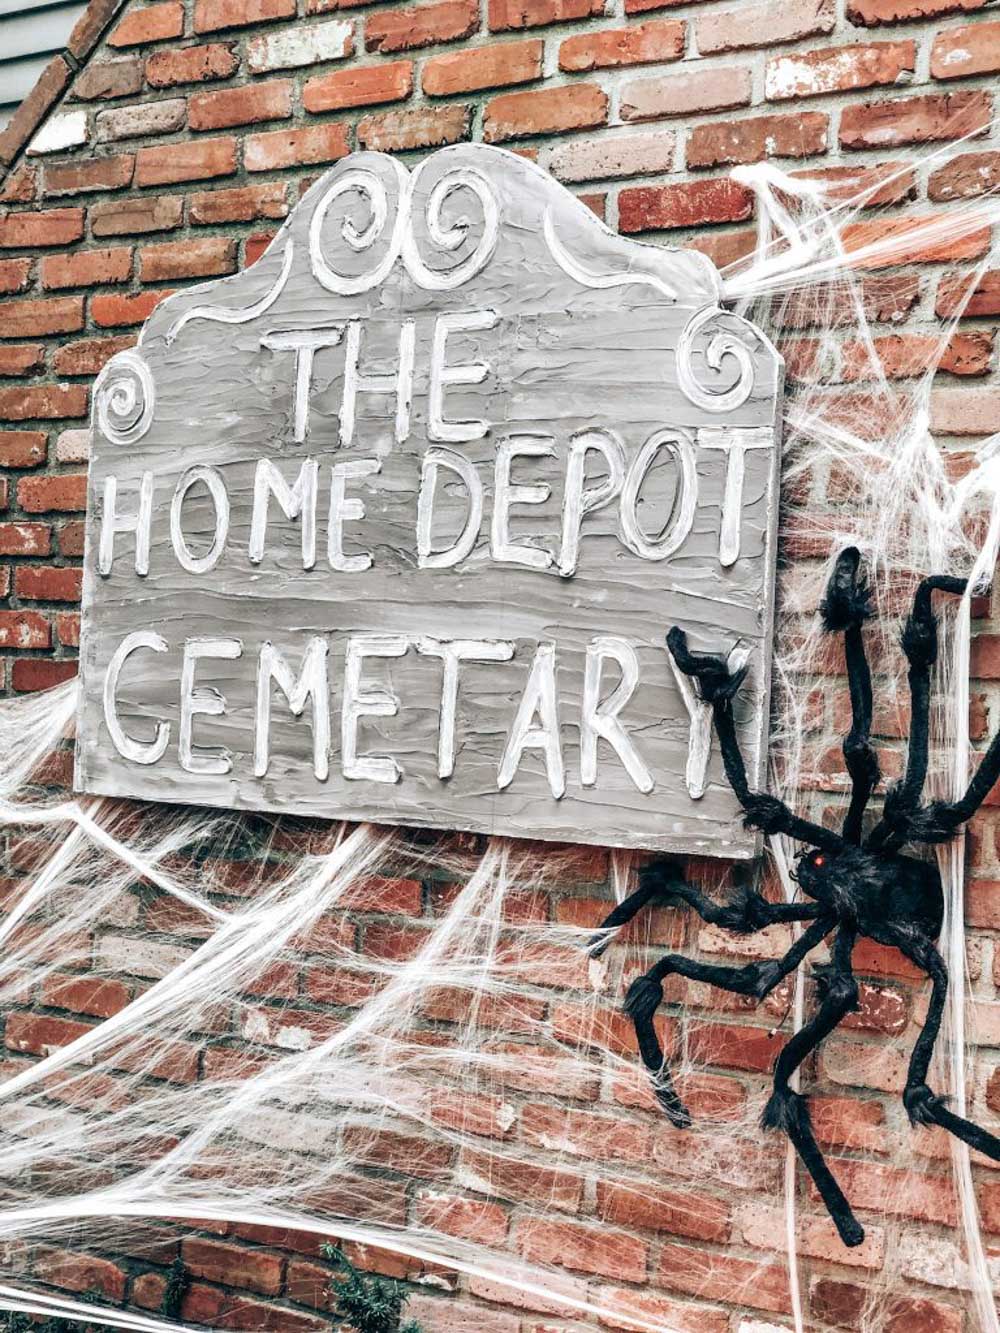 A sign that reads The Home Depot Cemetery with spider webs.